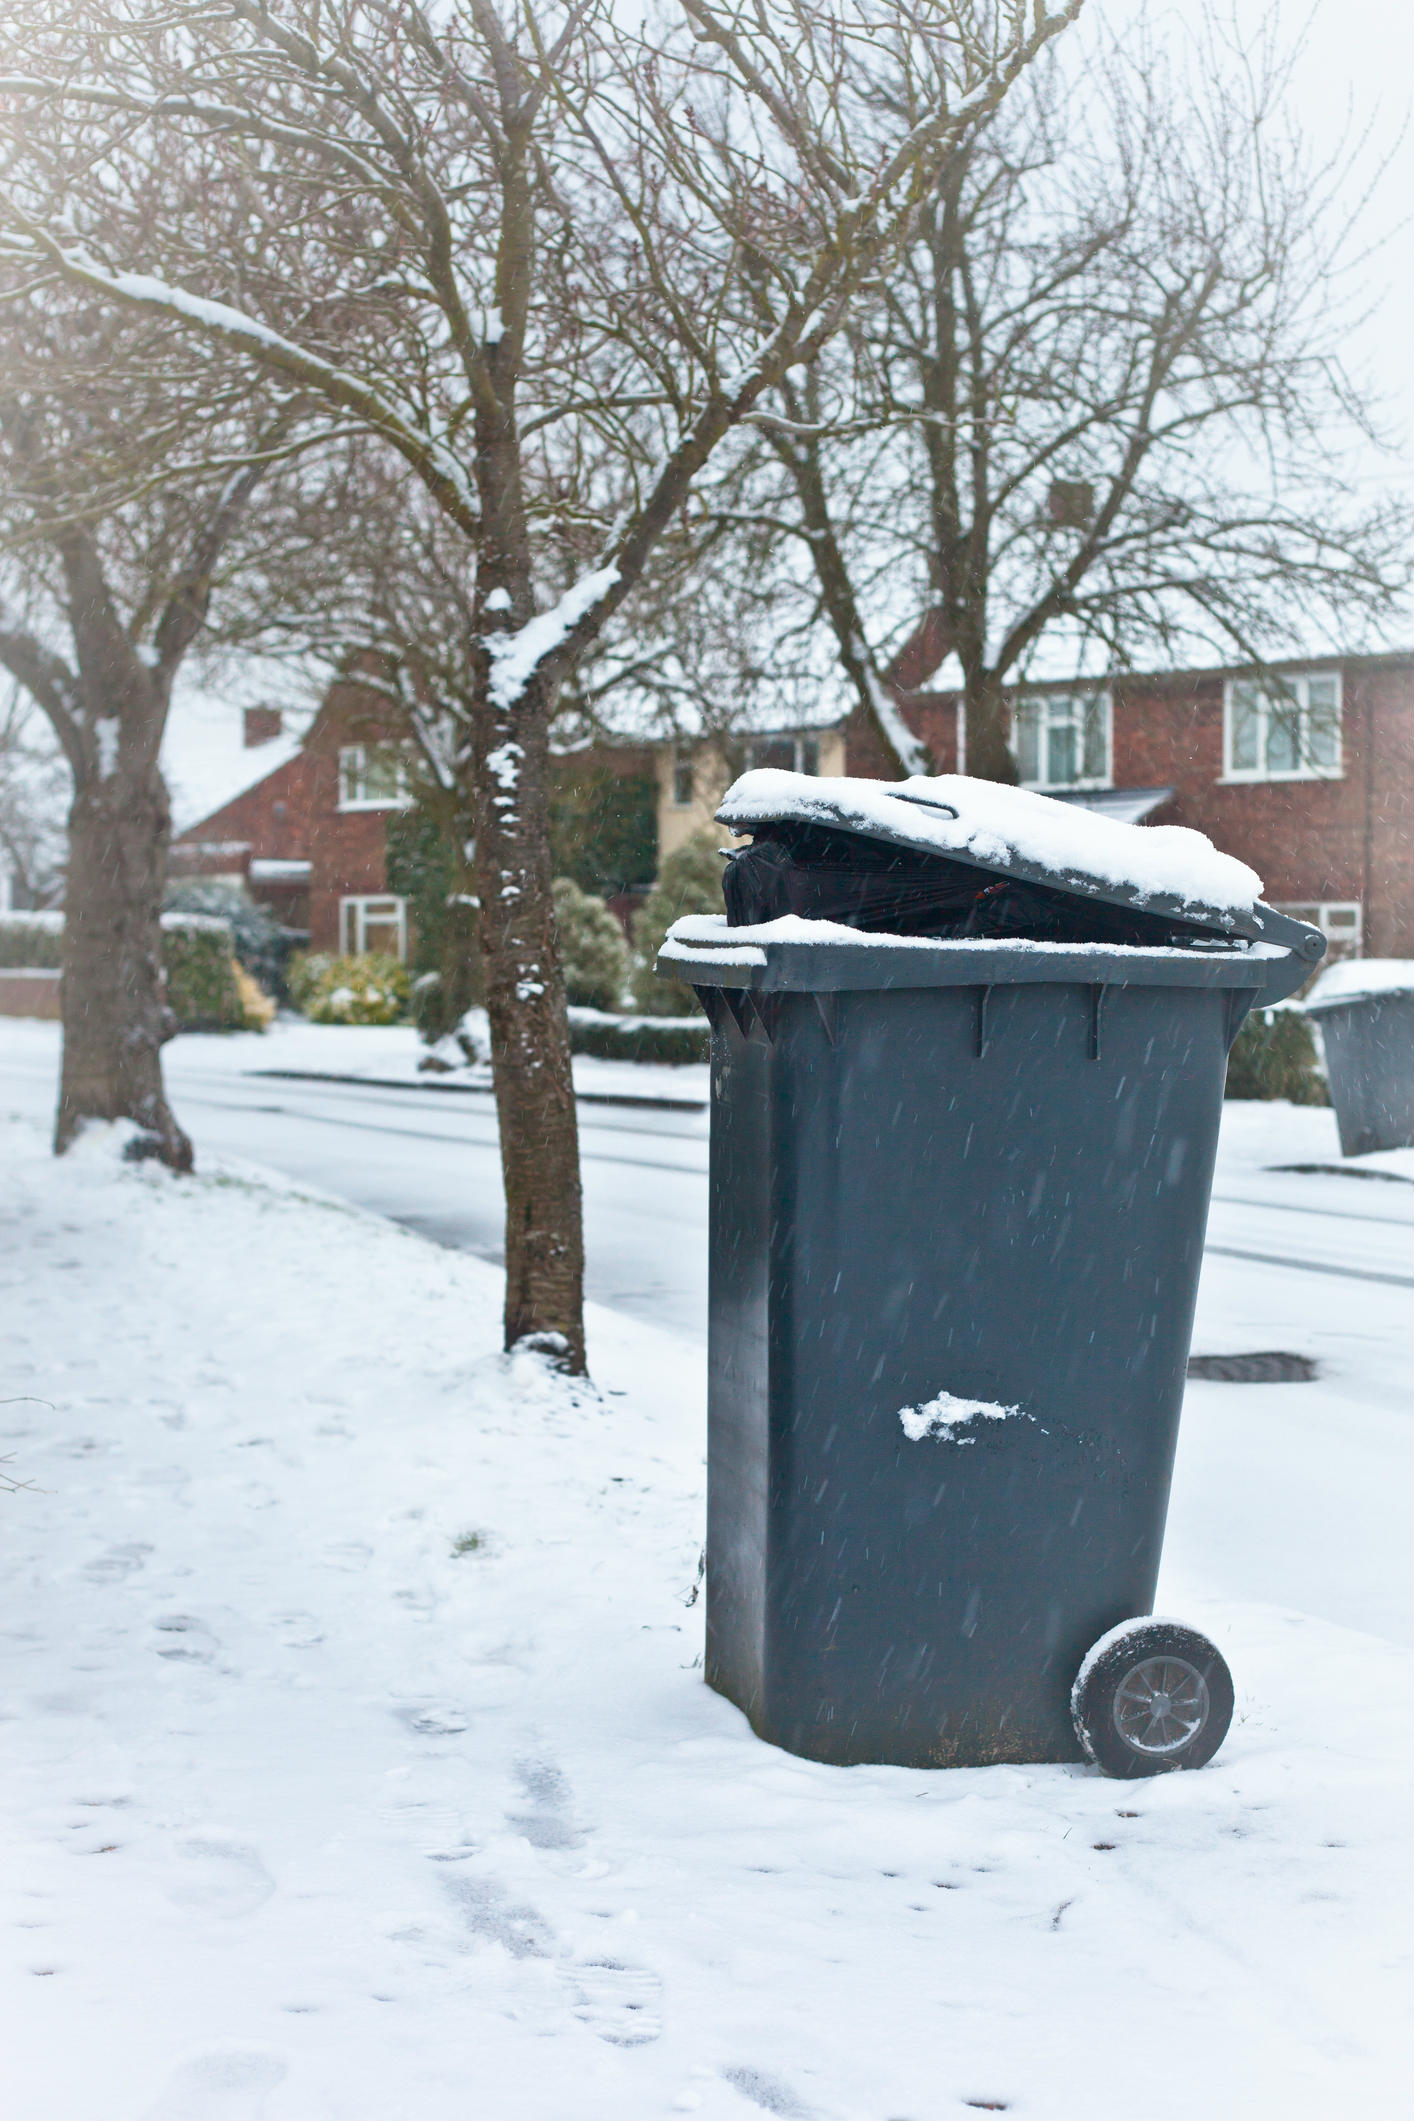 When bins are next to the road what should drivers be wary of